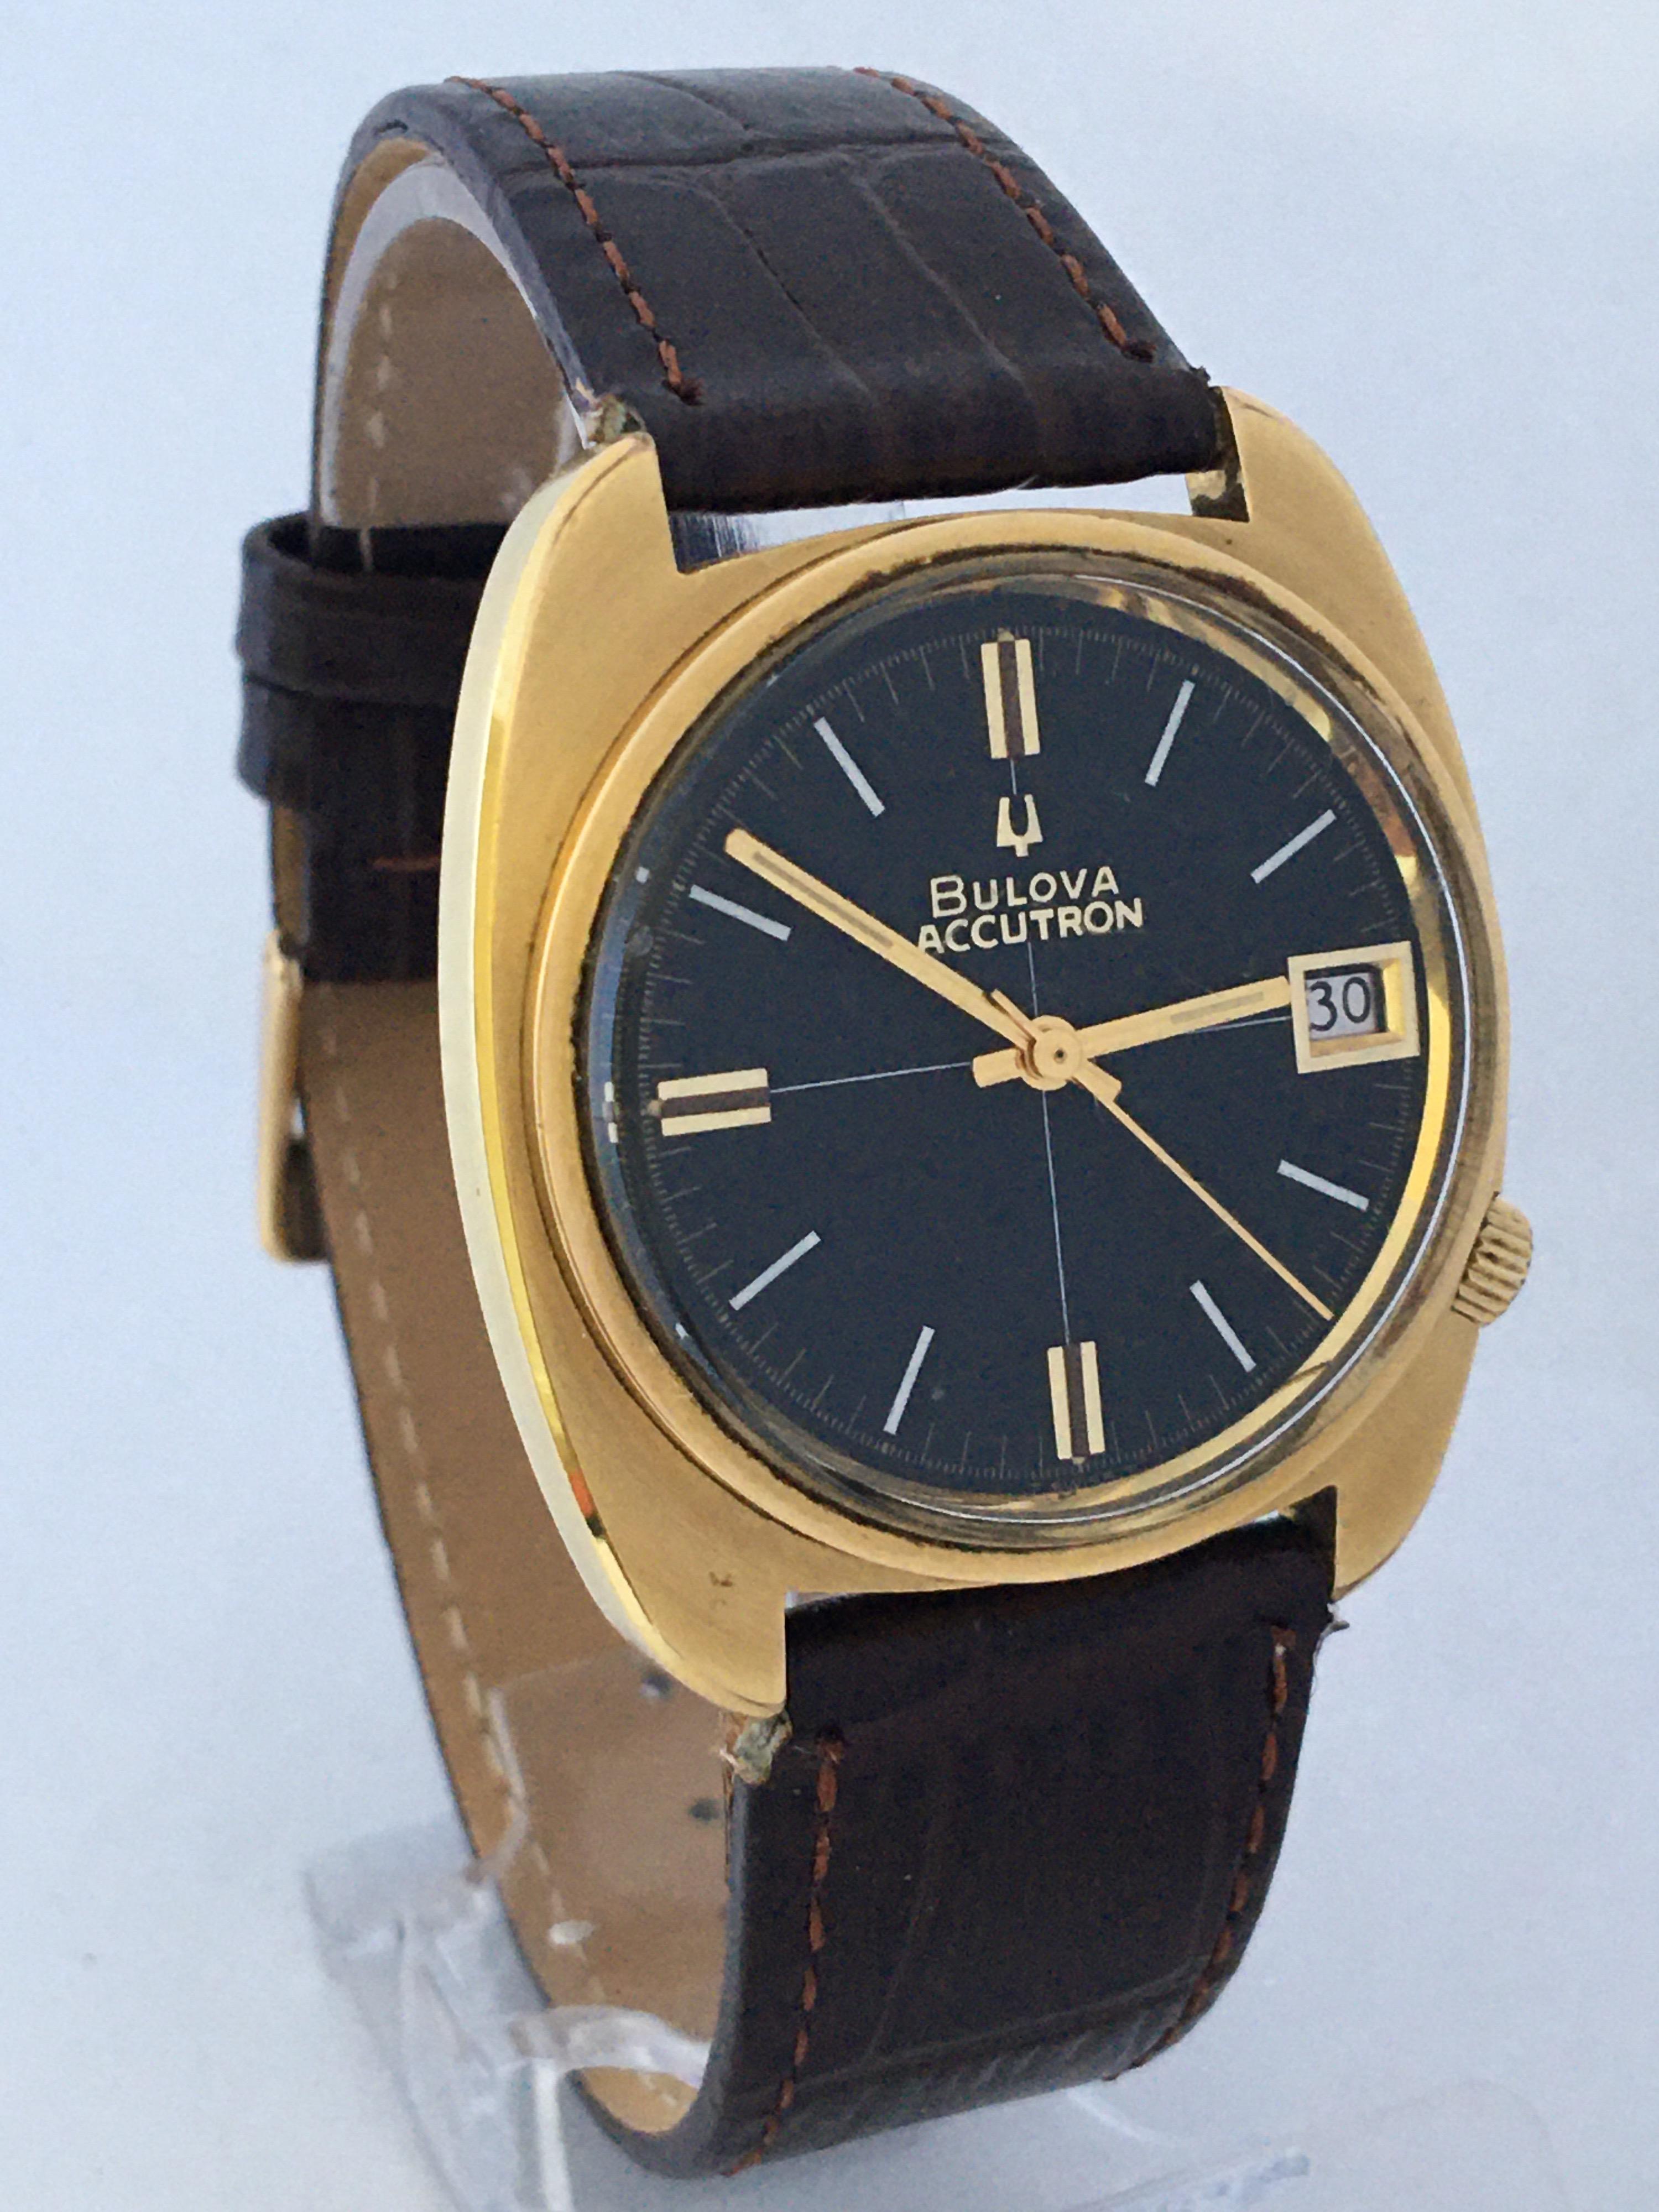 This beautiful pre-owned vintage watch is in good working condition and it is running well. Visible signs of ageing and wear with light and tiny scratches on the glass.  

Please study the images carefully as form part of the description.